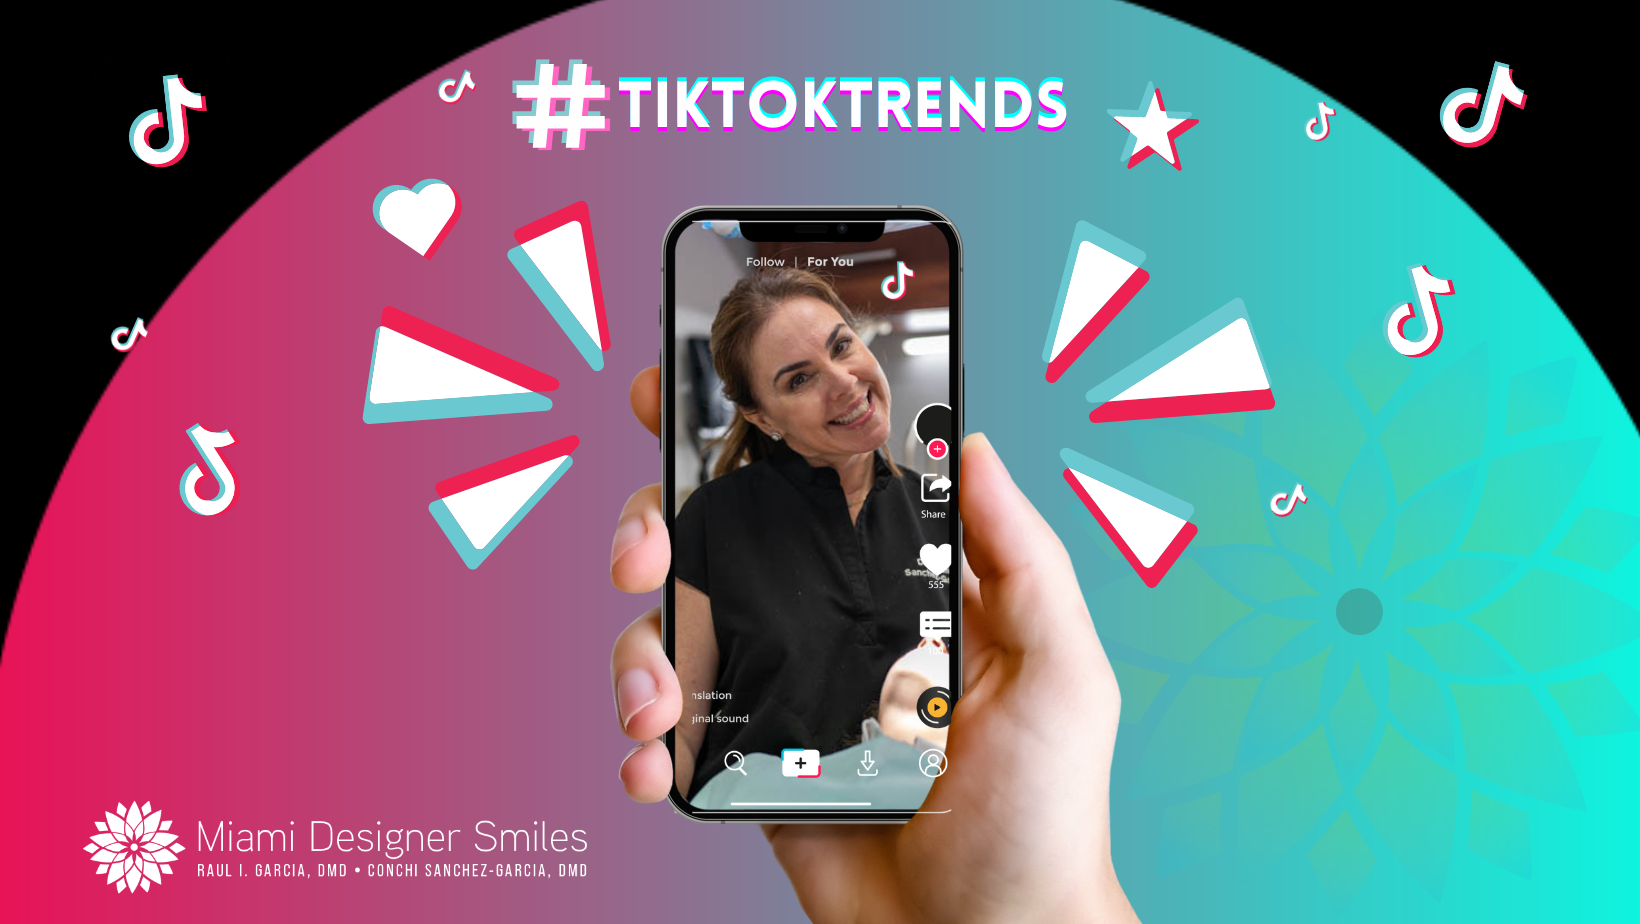 A smartphone displaying a tiktok video with a hashtag "#mewing" overlay on a vibrant circular background with tiktok logo icons.